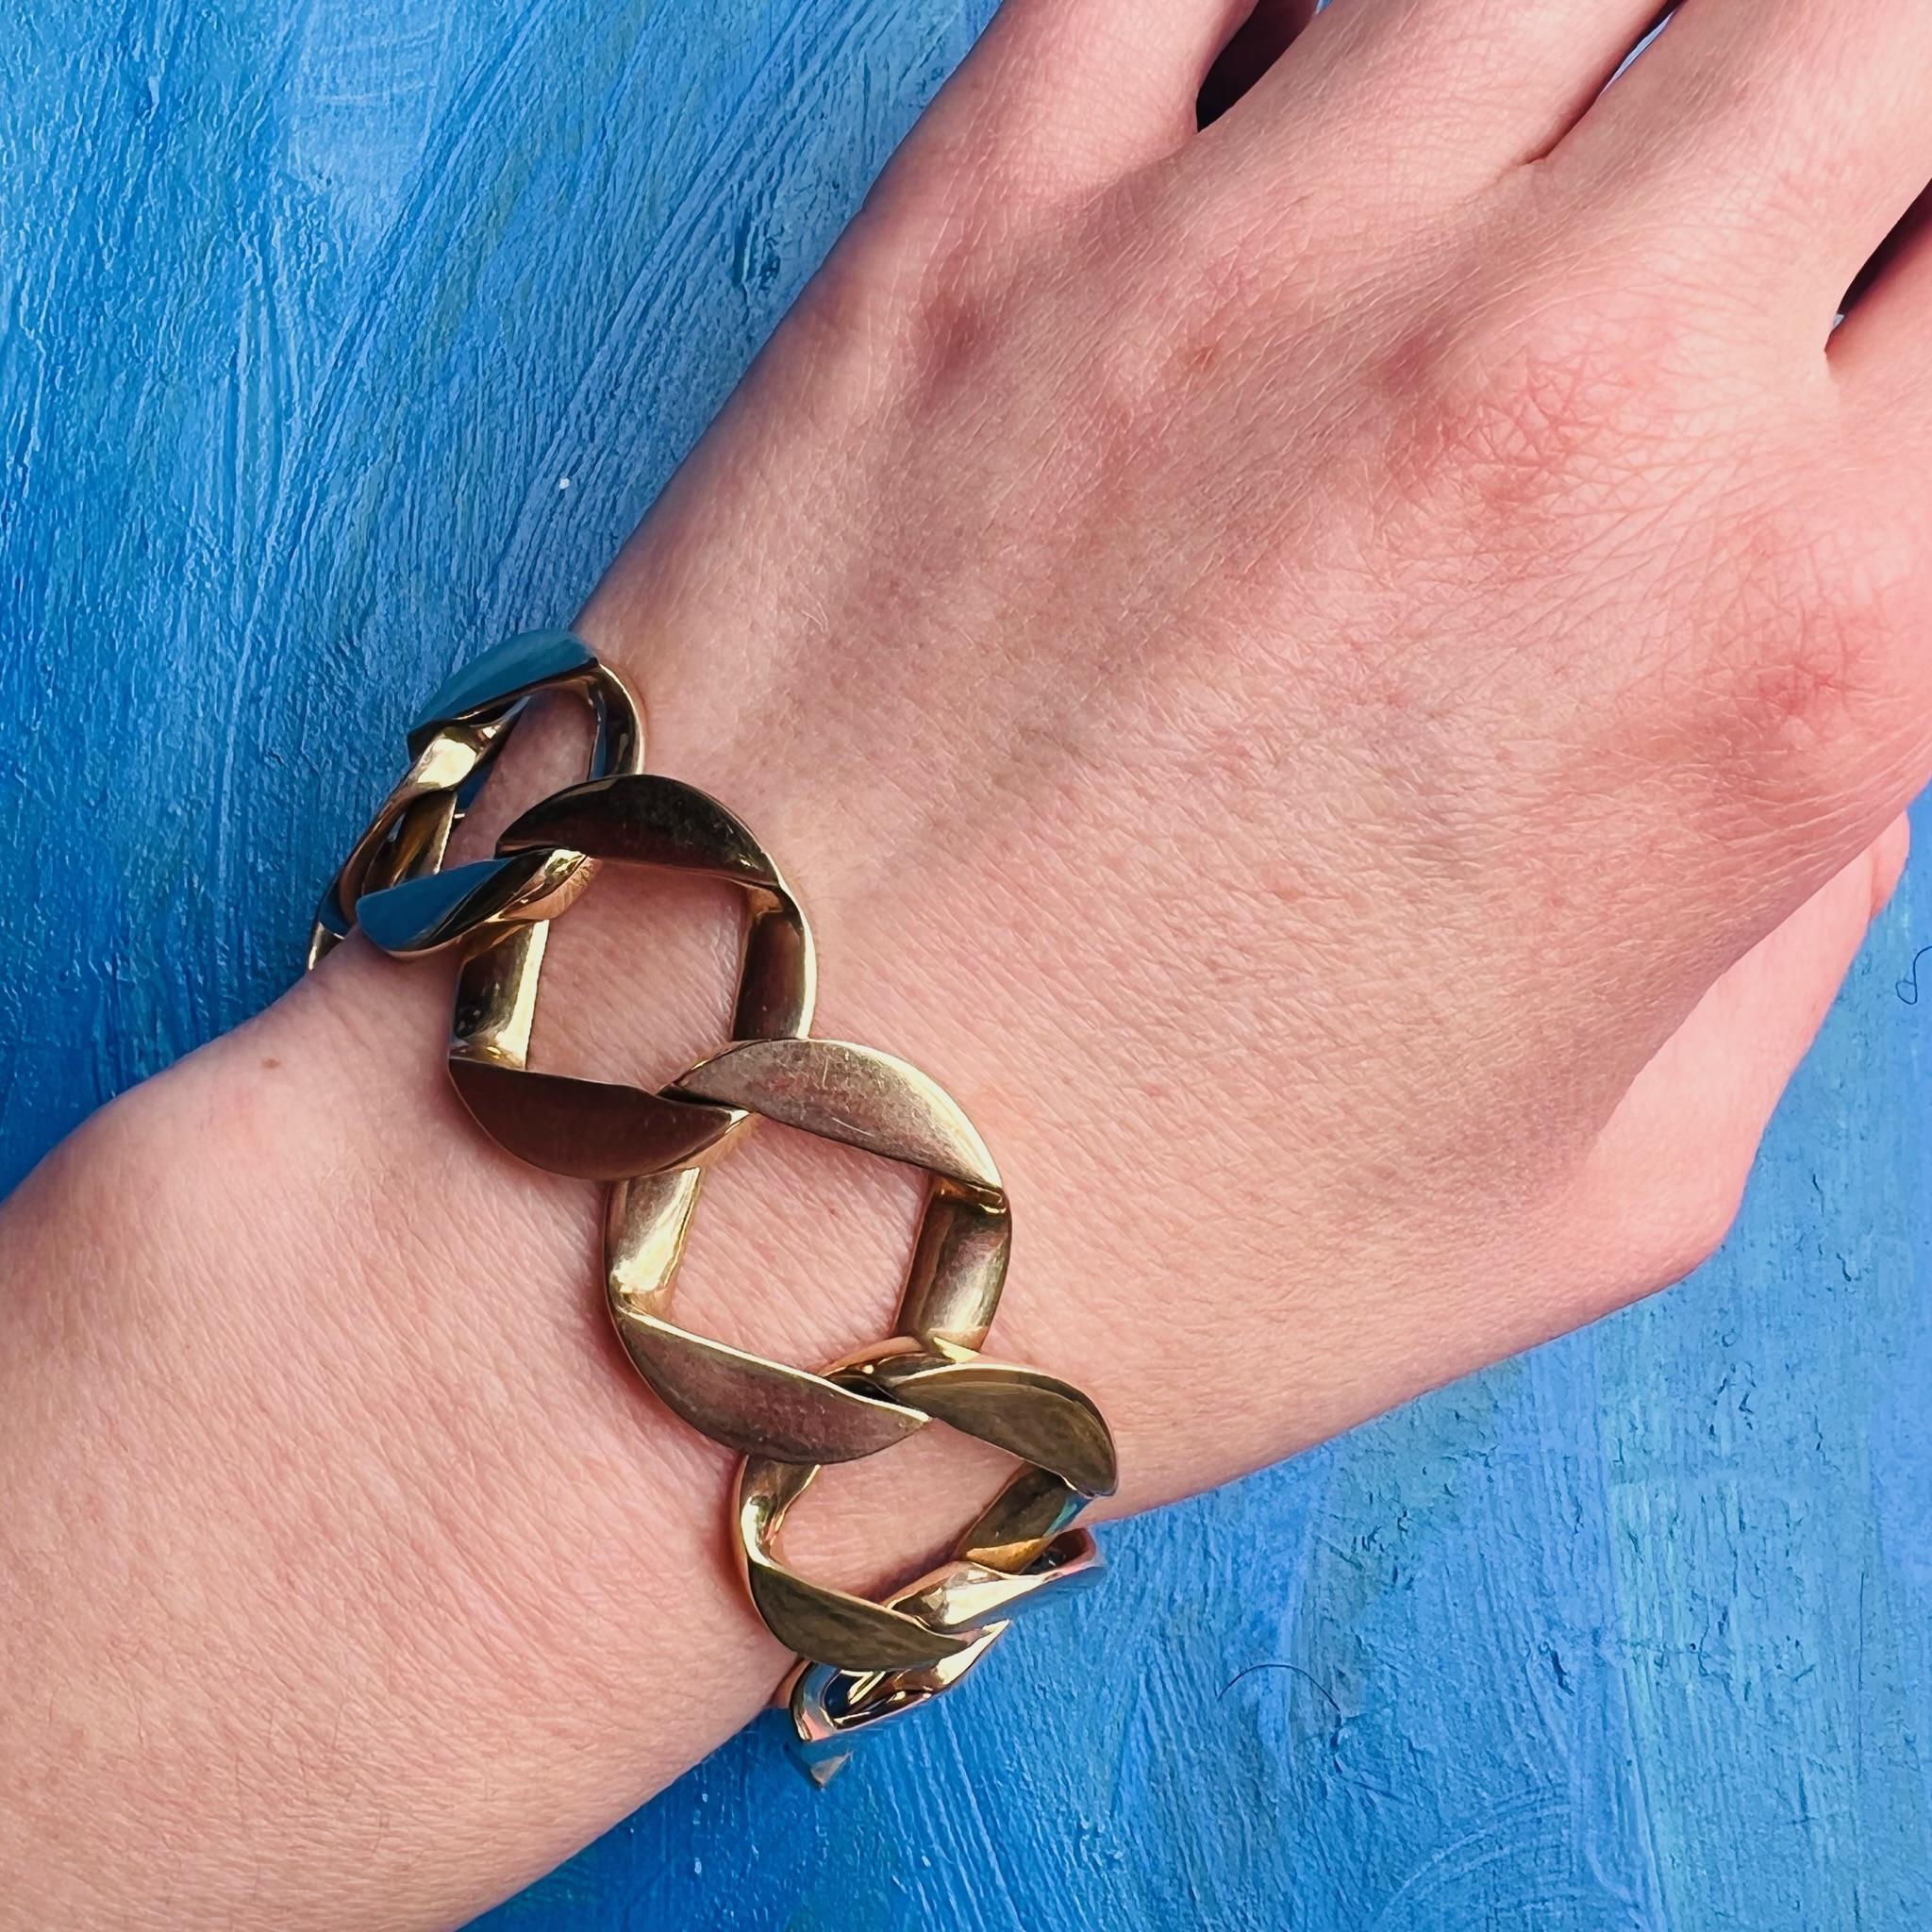 Lavish Heavy Mid-Century Gold Curb Link Bracelet In Good Condition For Sale In Portland, OR